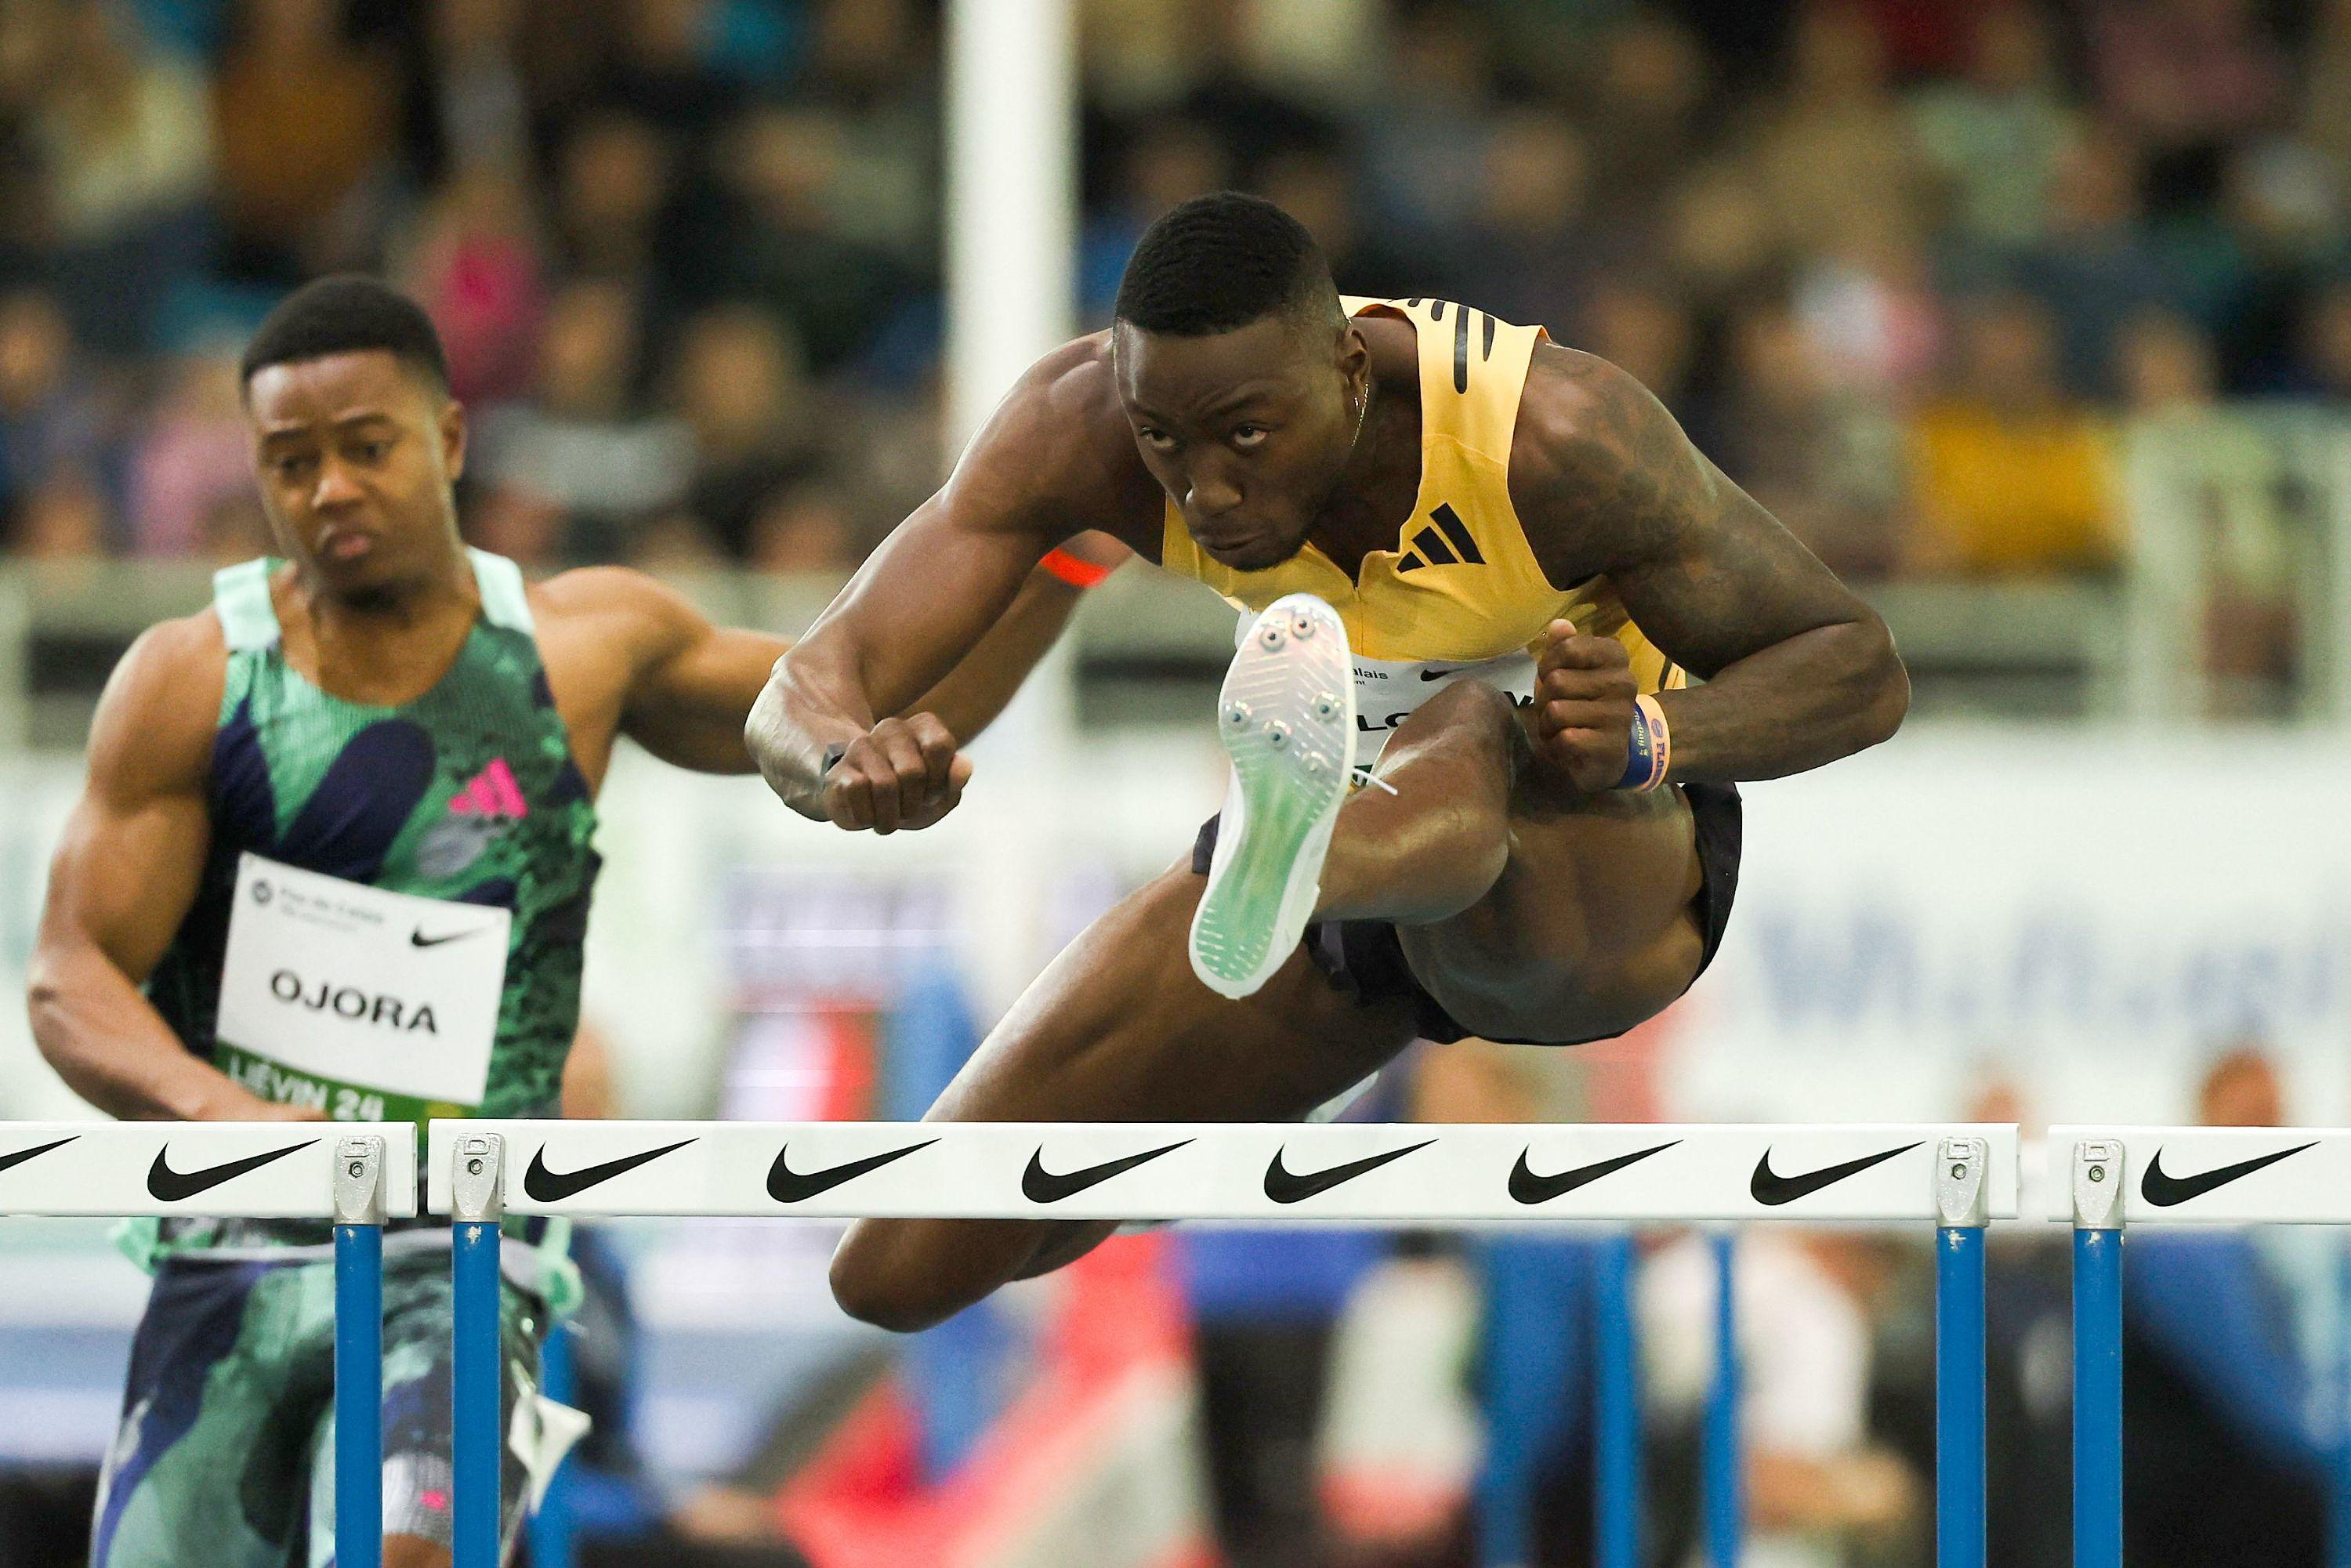 Athletics: Grant Holloway victorious in Liévin